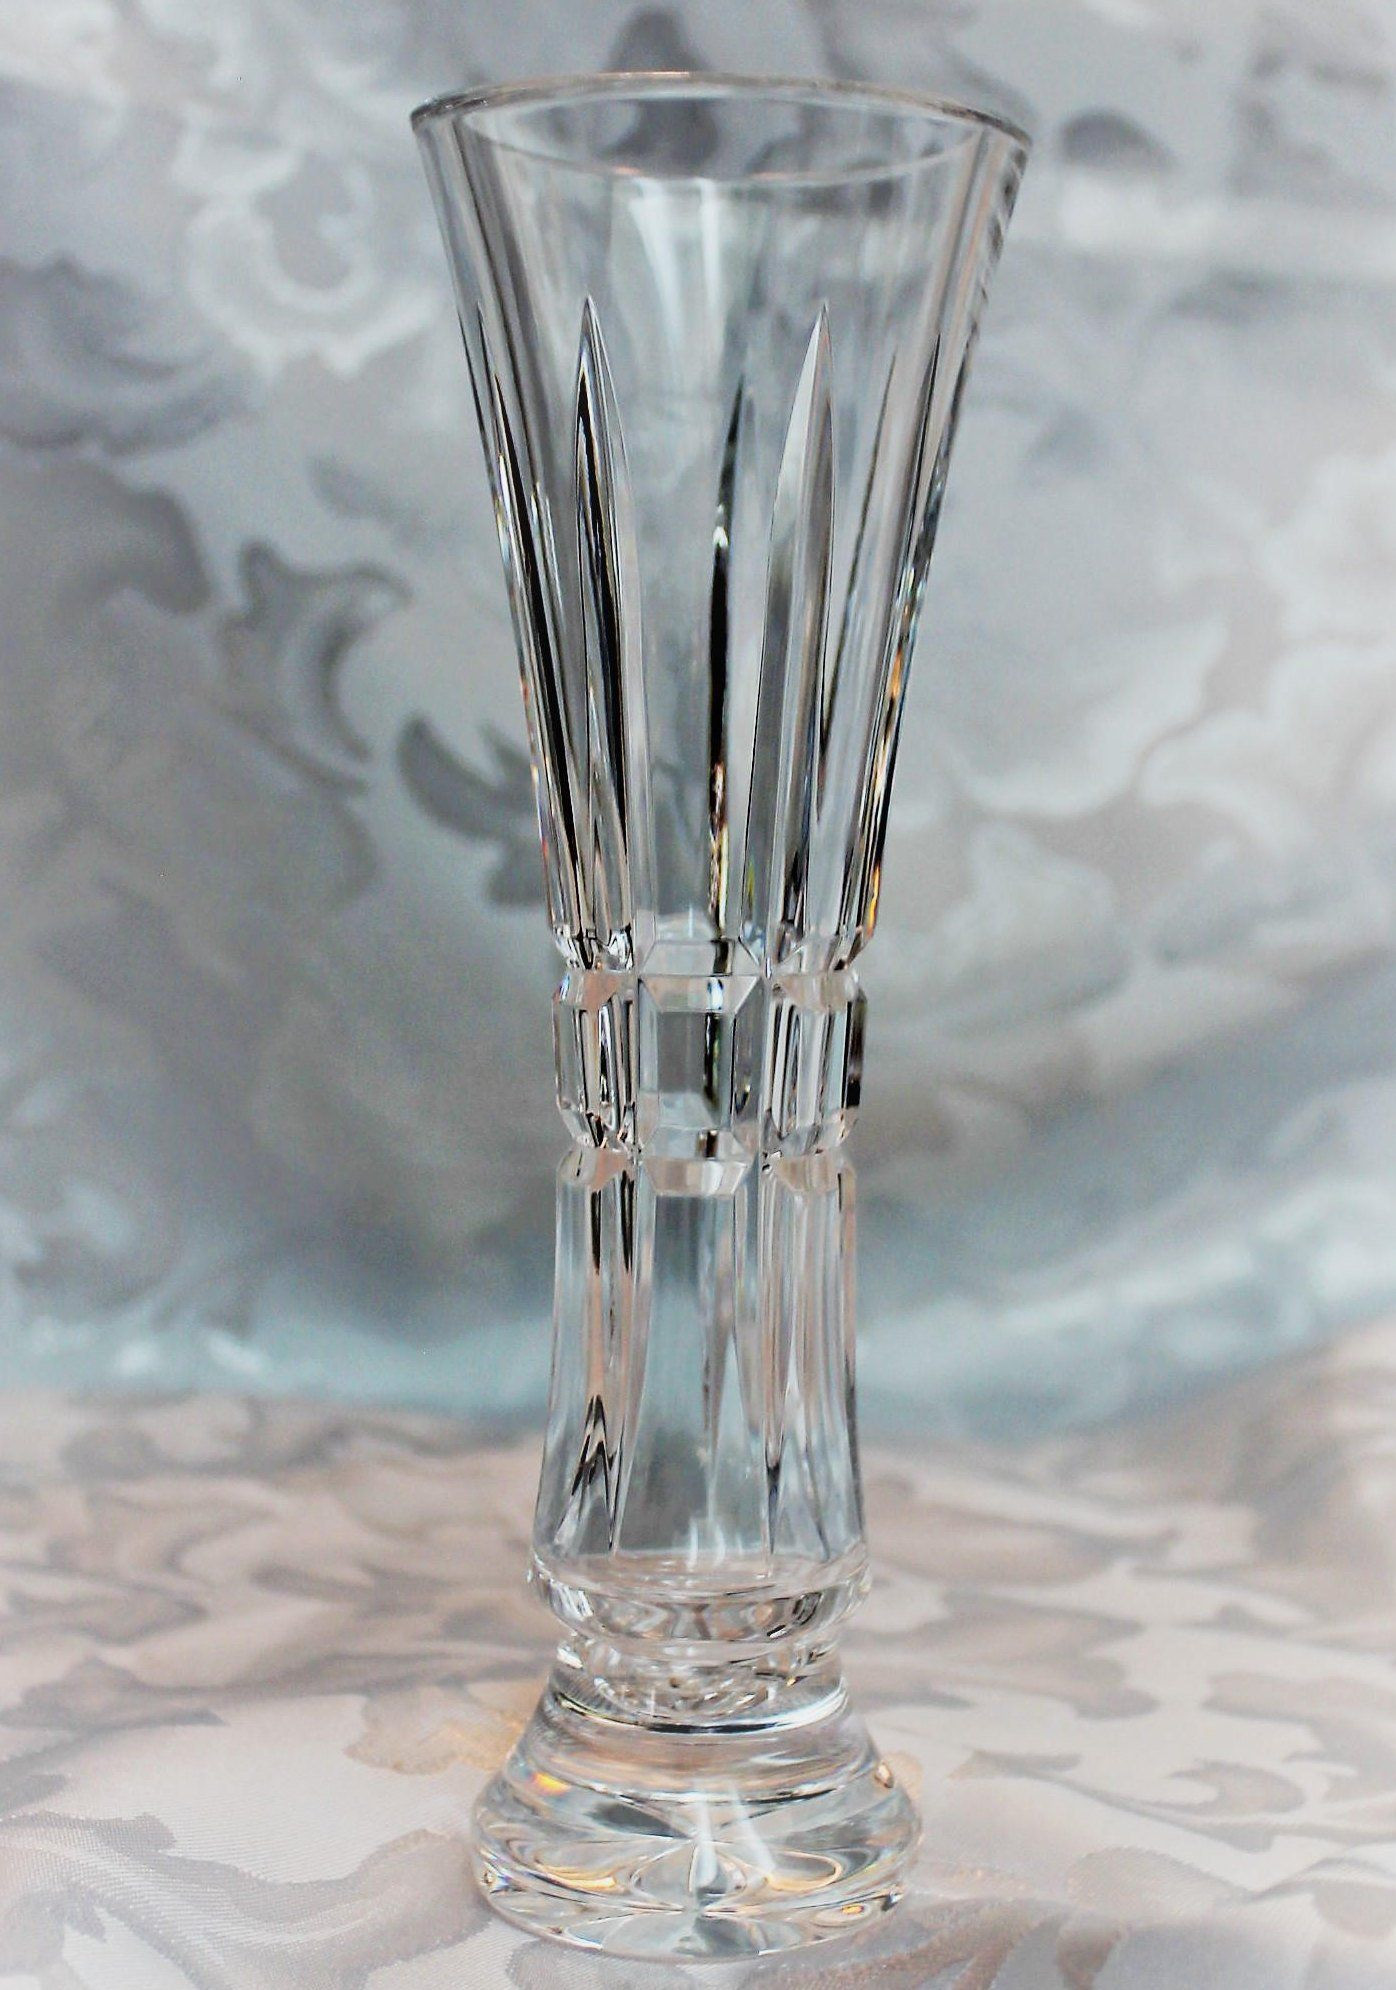 antique crystal vases and bowls of 22 hobnail glass vase the weekly world with cut glass bud vase